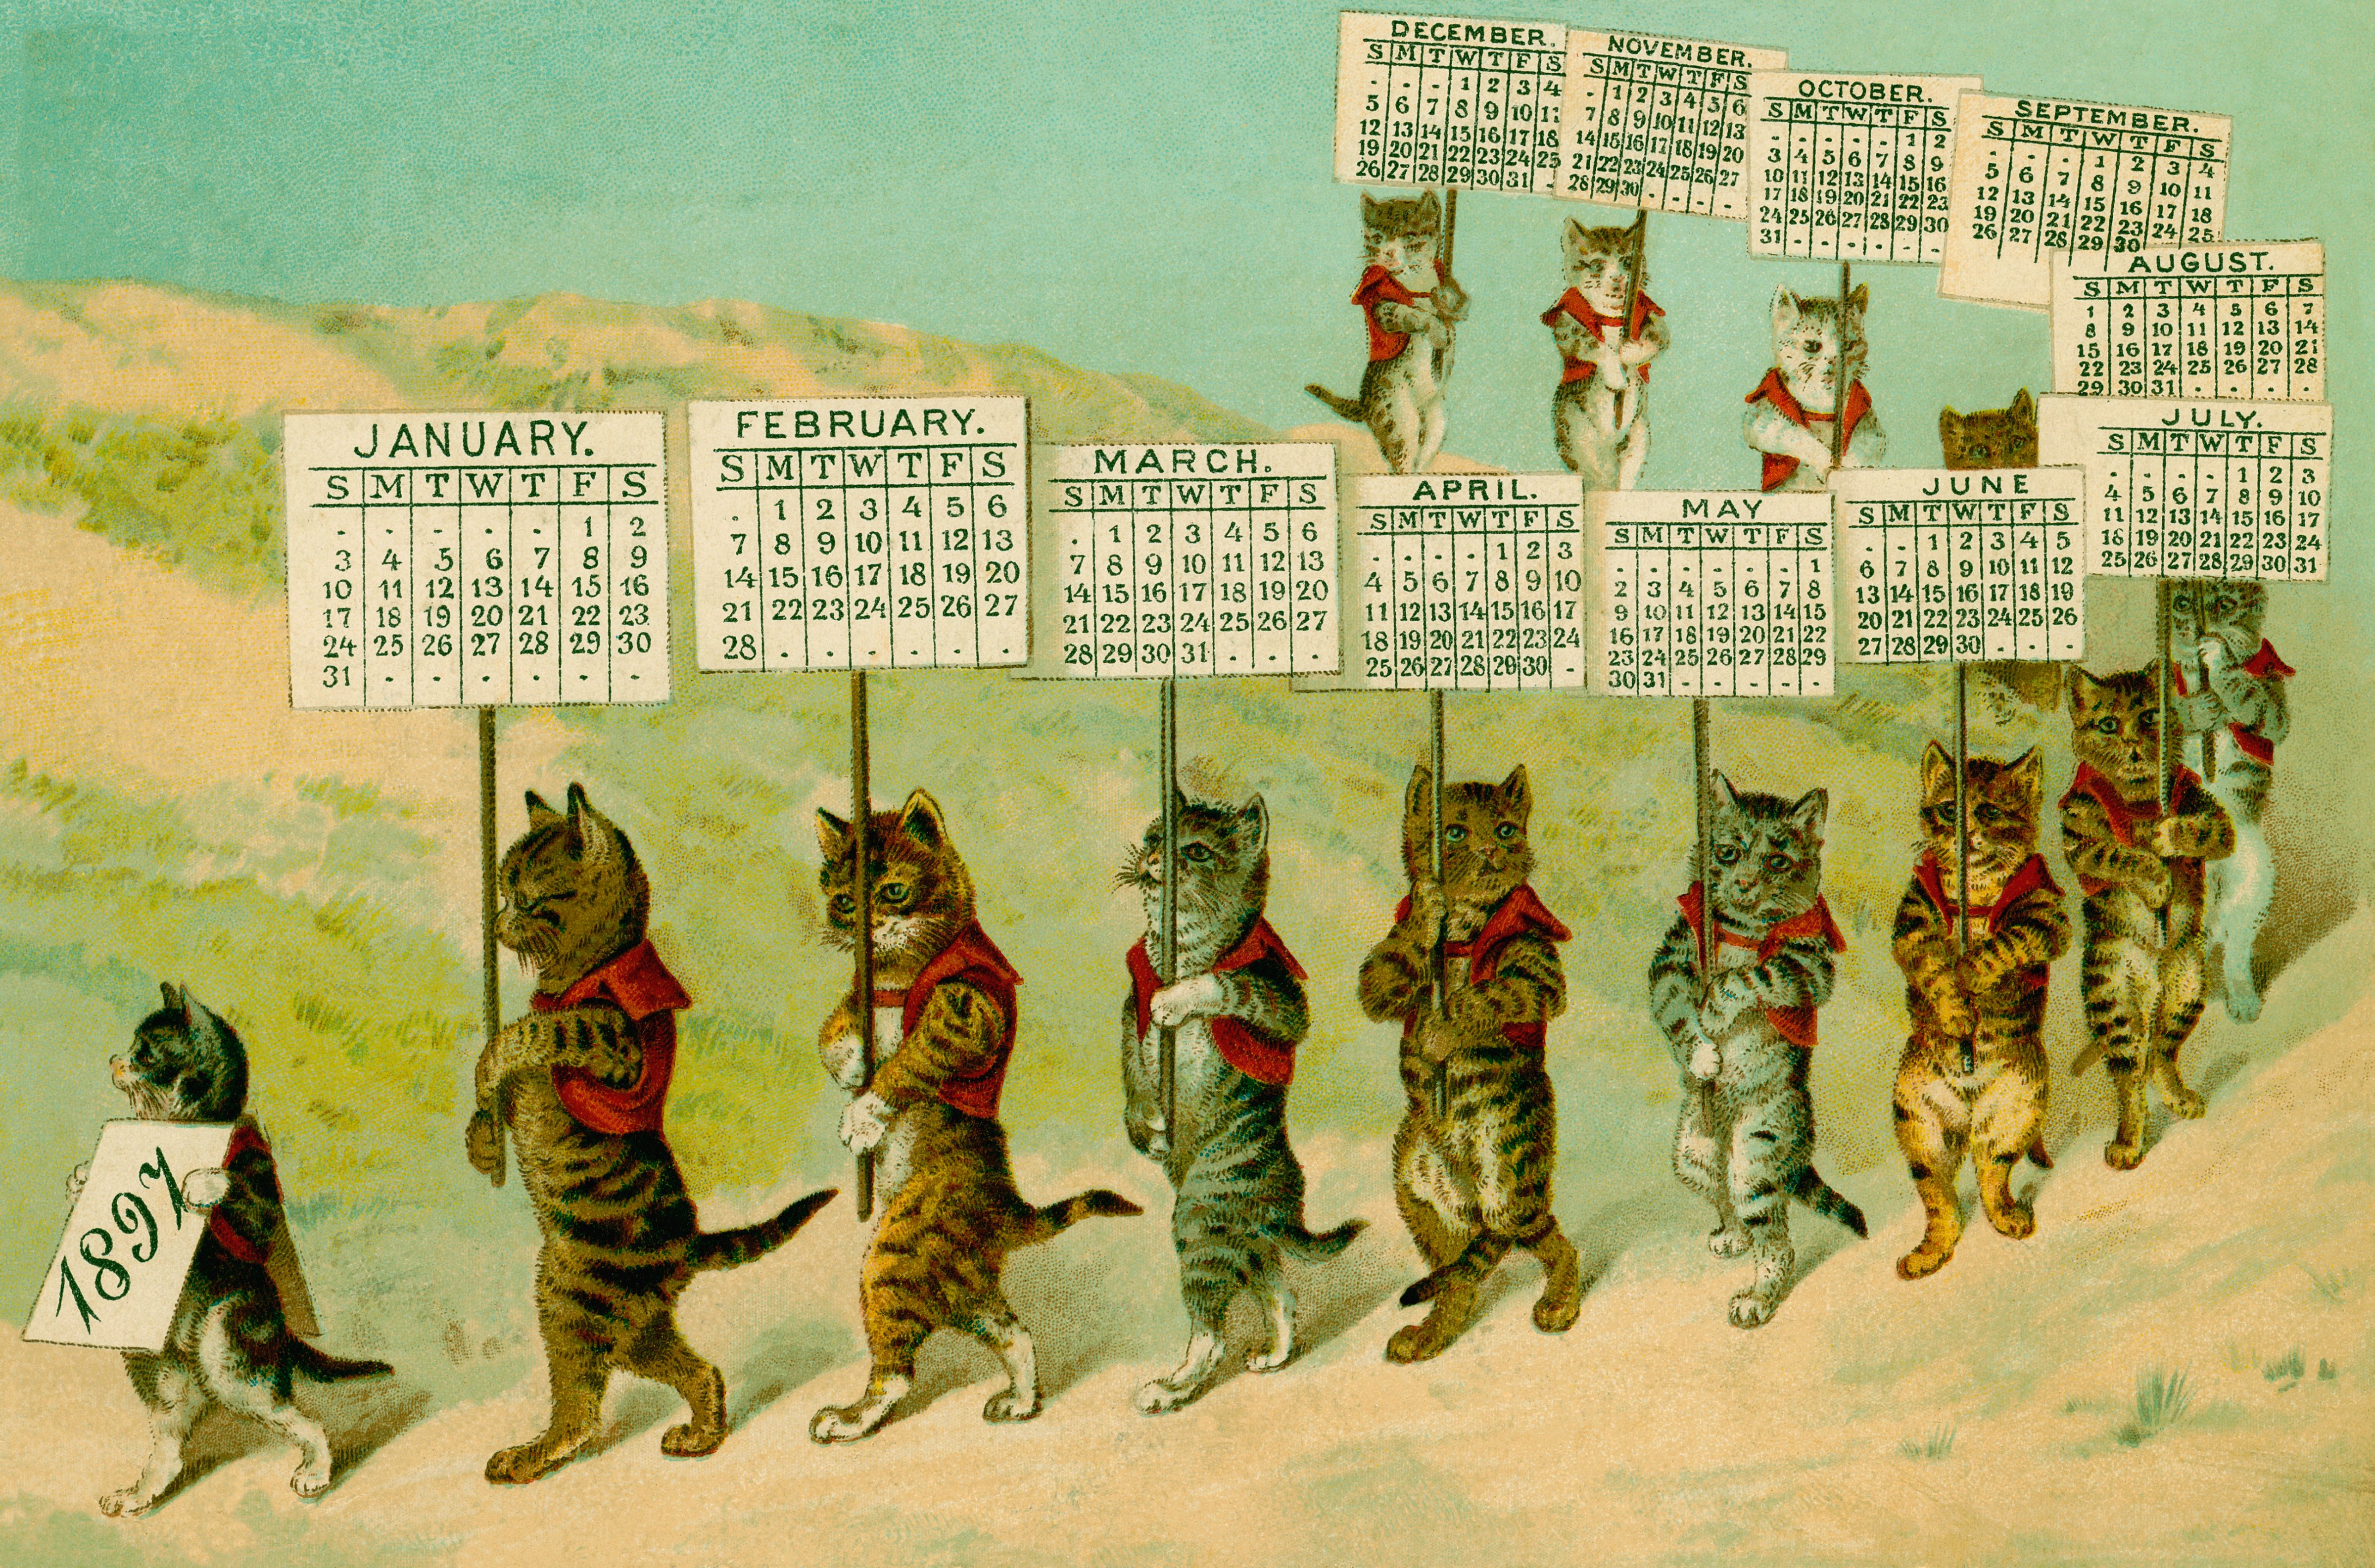 1897 Calendar with Parading Cats